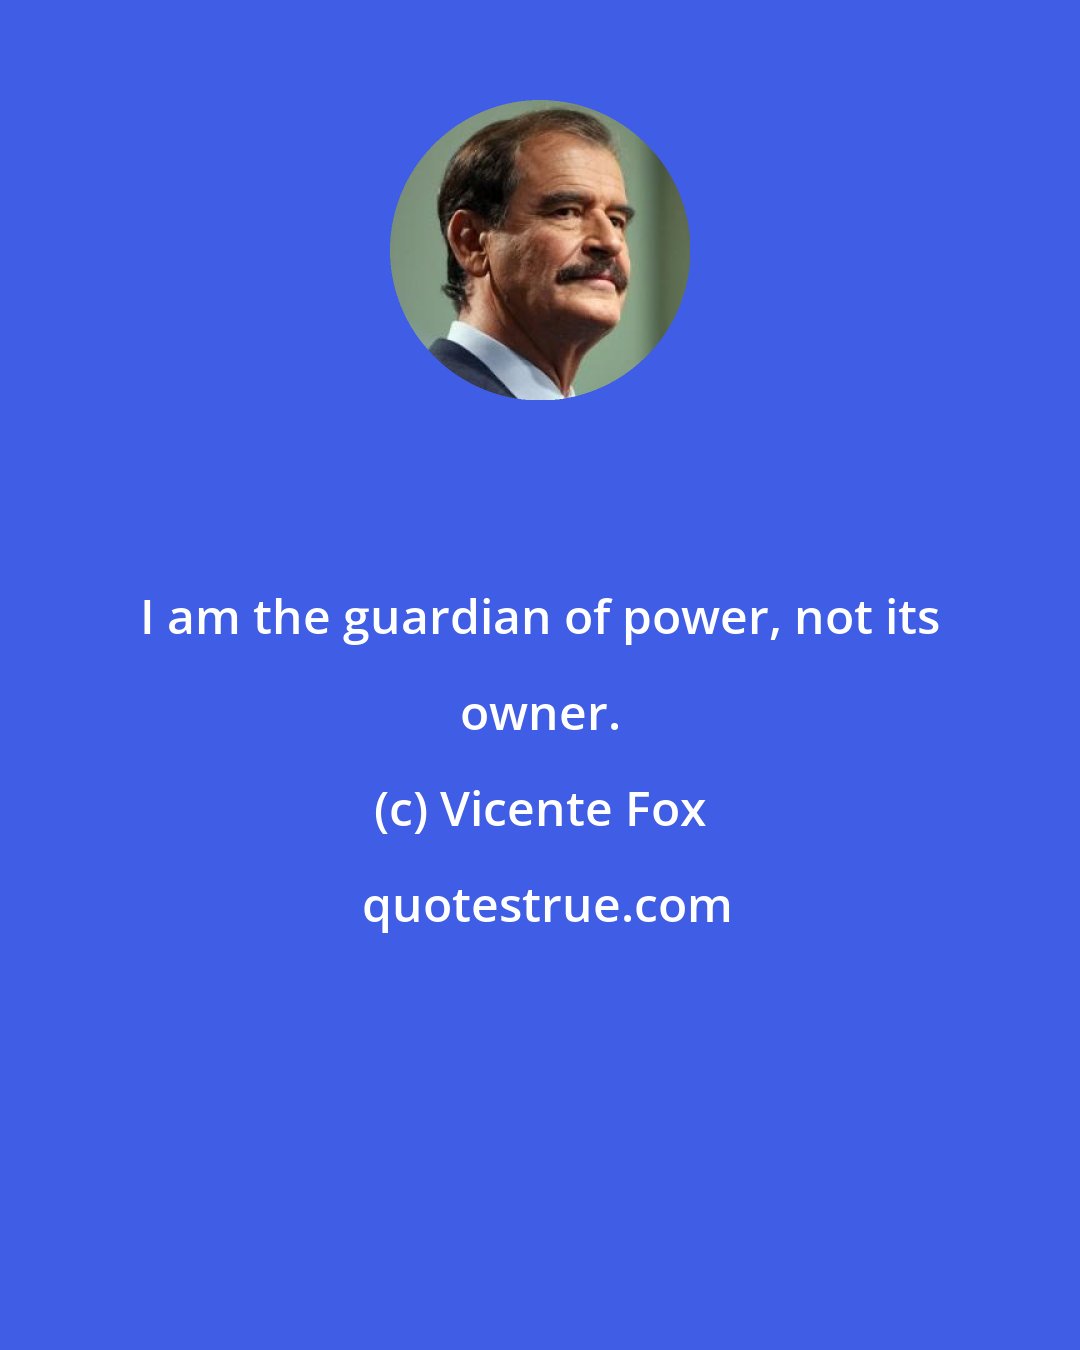 Vicente Fox: I am the guardian of power, not its owner.